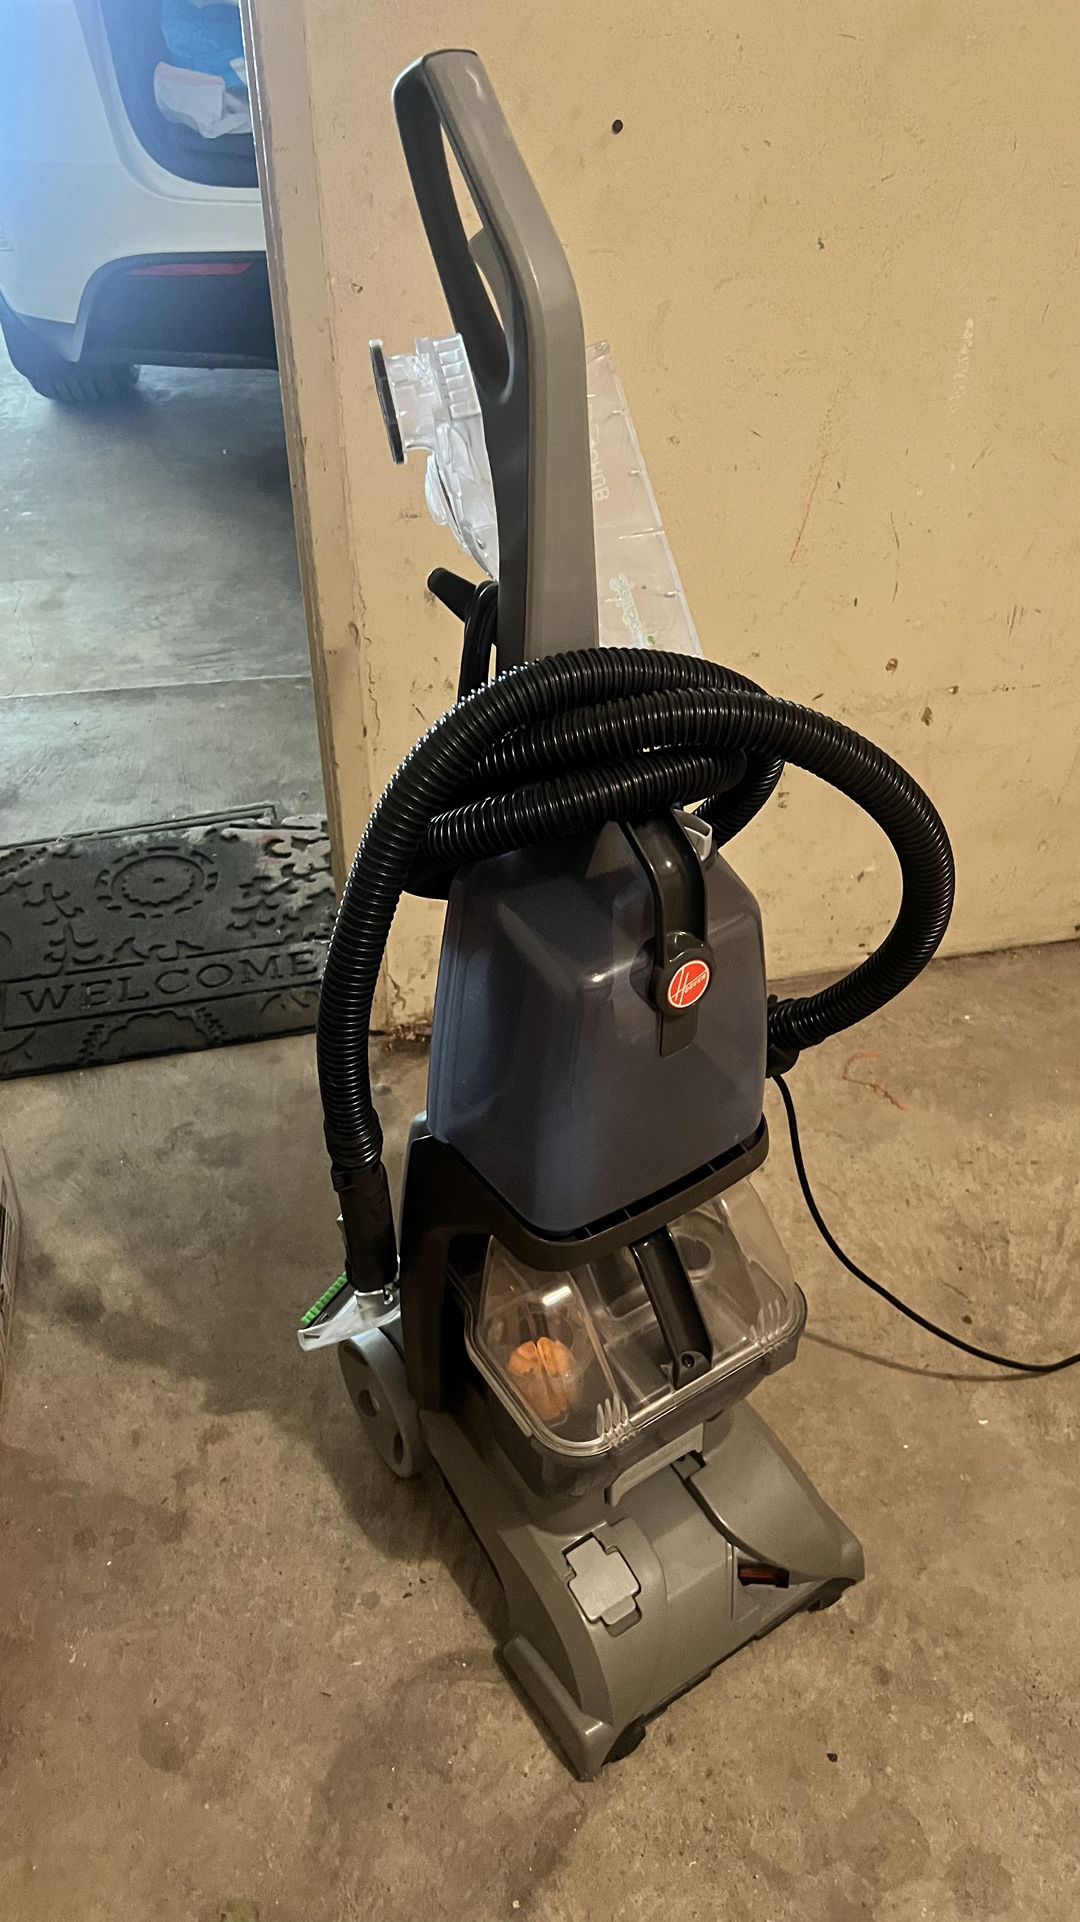 Carpet Washer Machine, Only Use Once Almost New. $30 Pick Up In Temple City